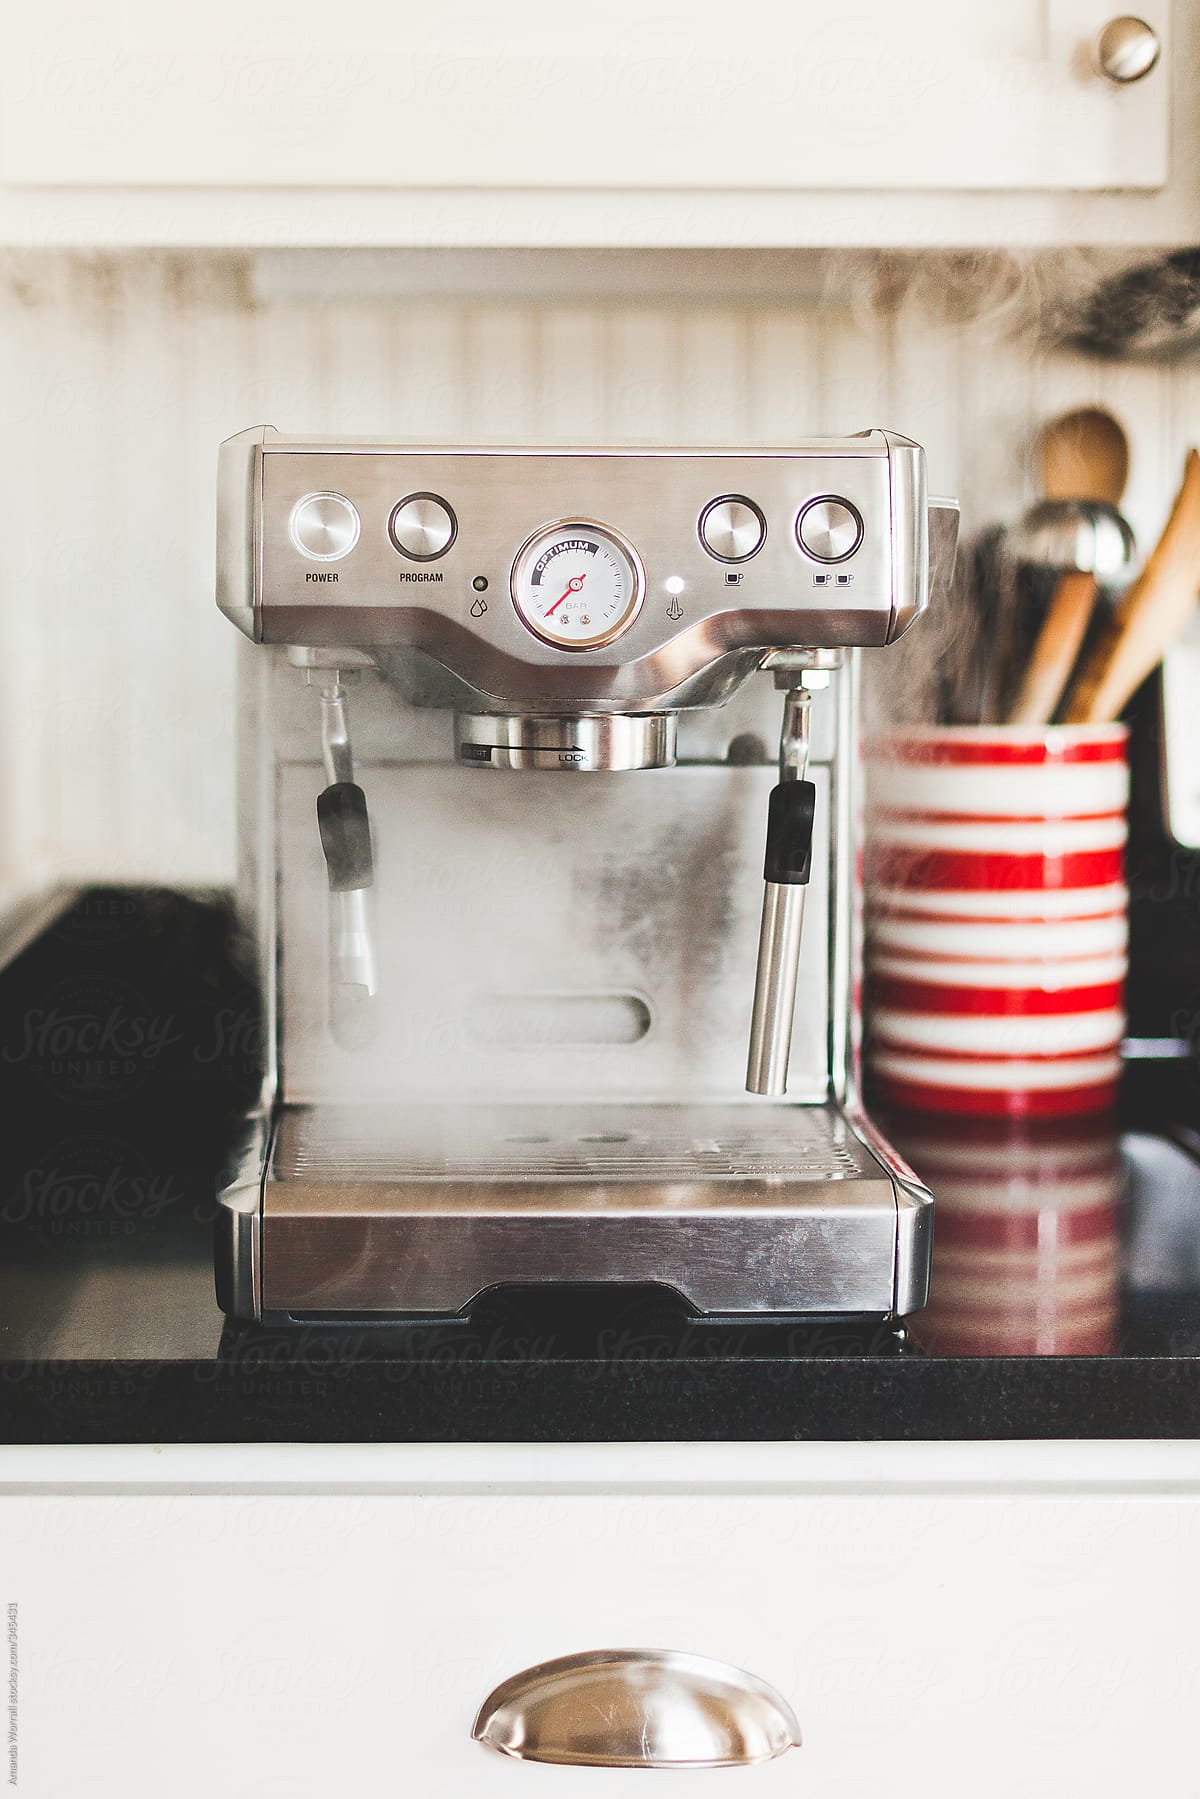 Steaming Espresso Machine sitting on counter with red and white striped utensil holder